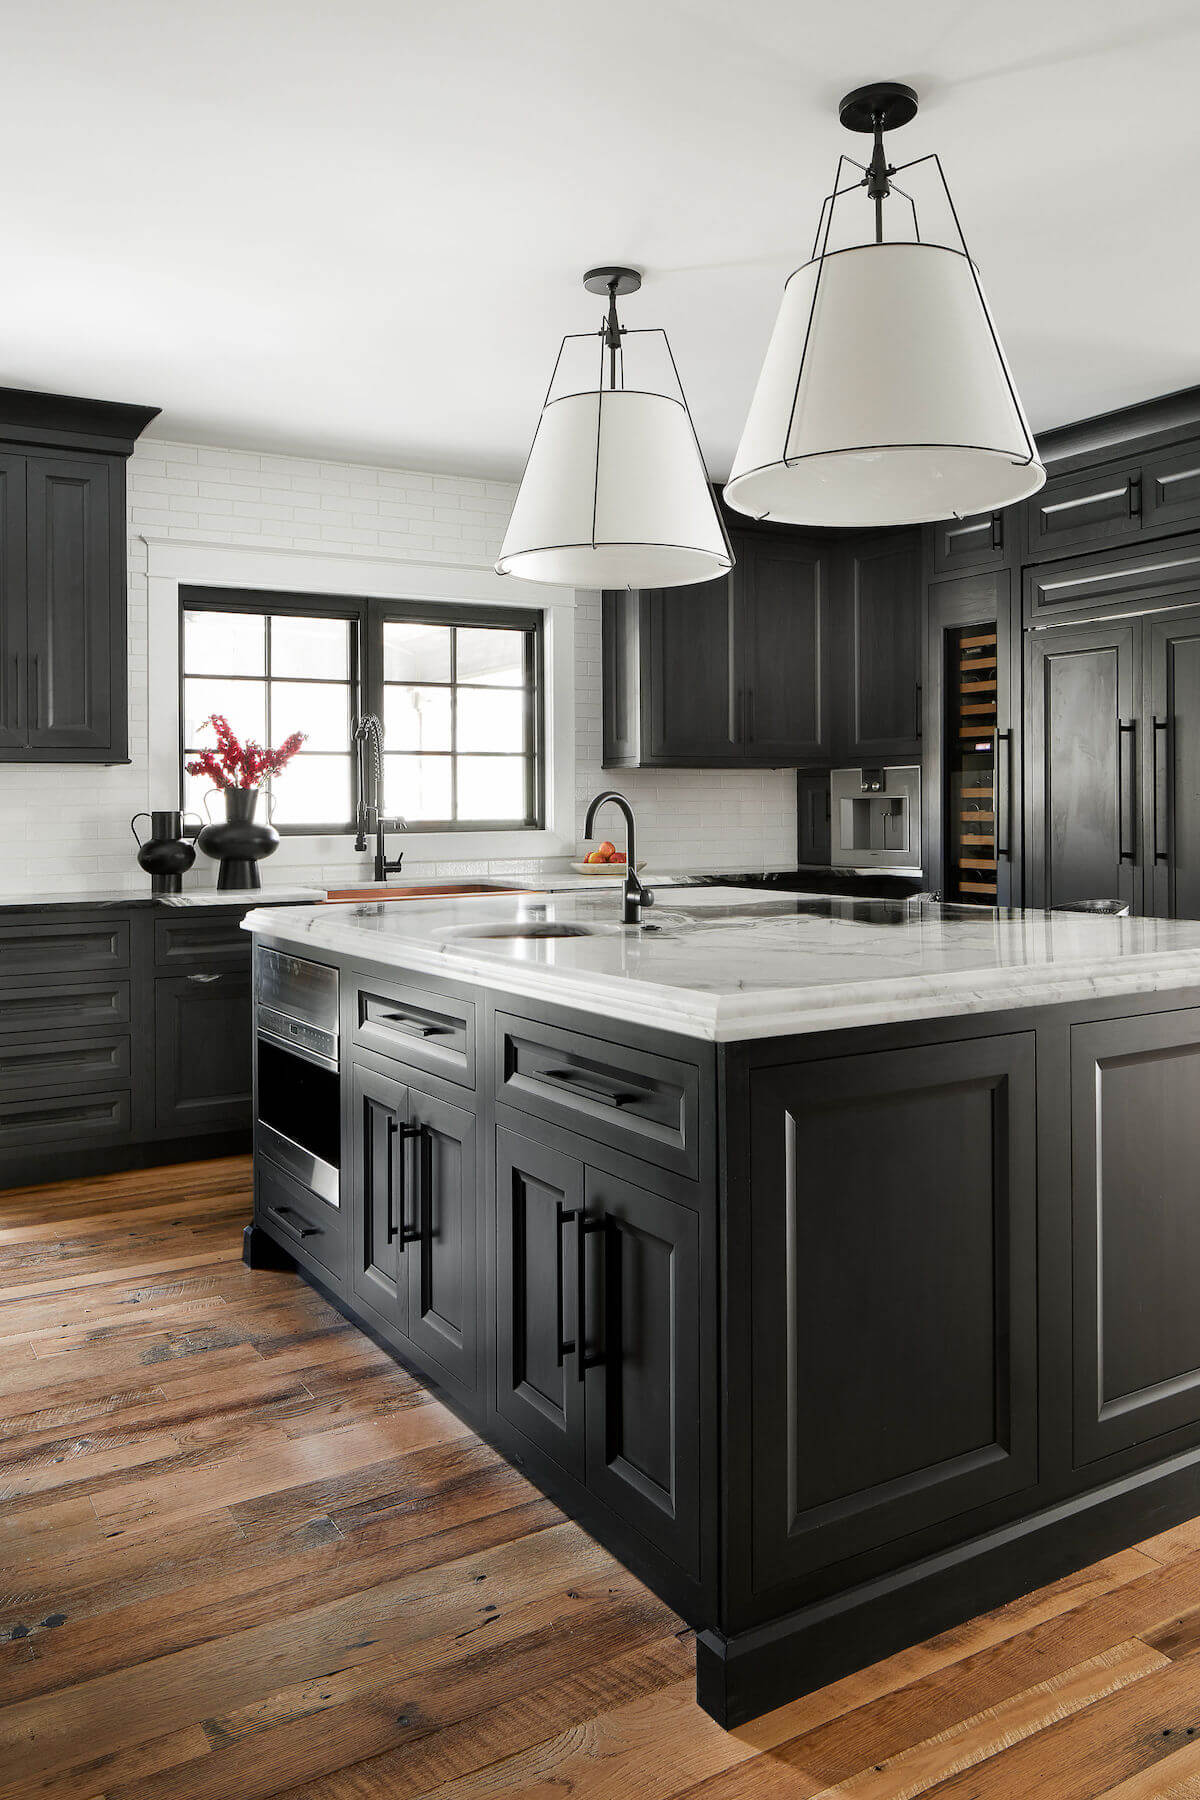 Black and White Kitchen by Megan Temple Designs